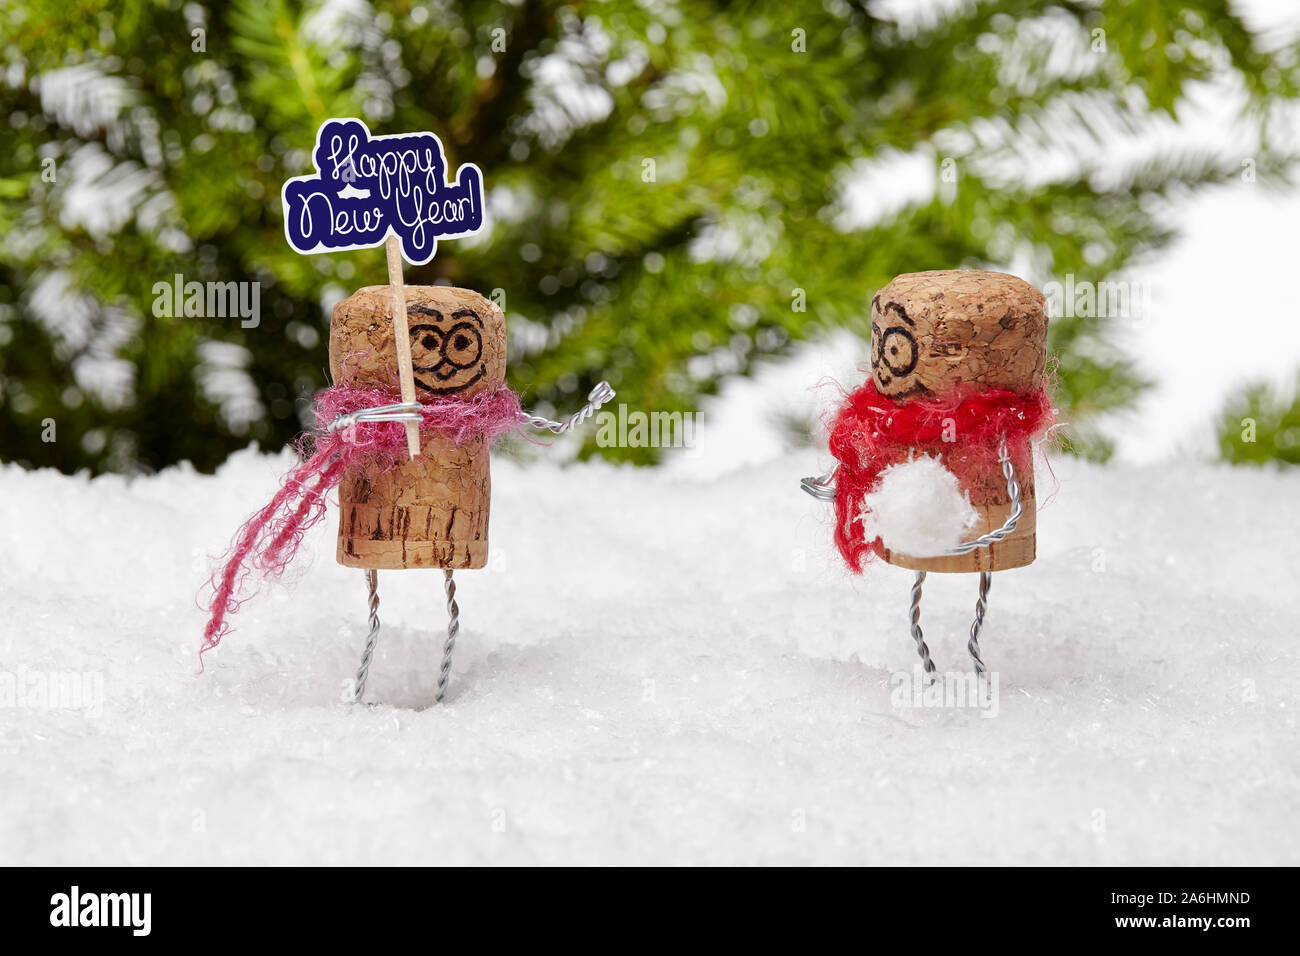 Funny champagne cork man on white snow wishes anybody 'happy new year', his playful pal wants to play snowball fight. Stock Photo